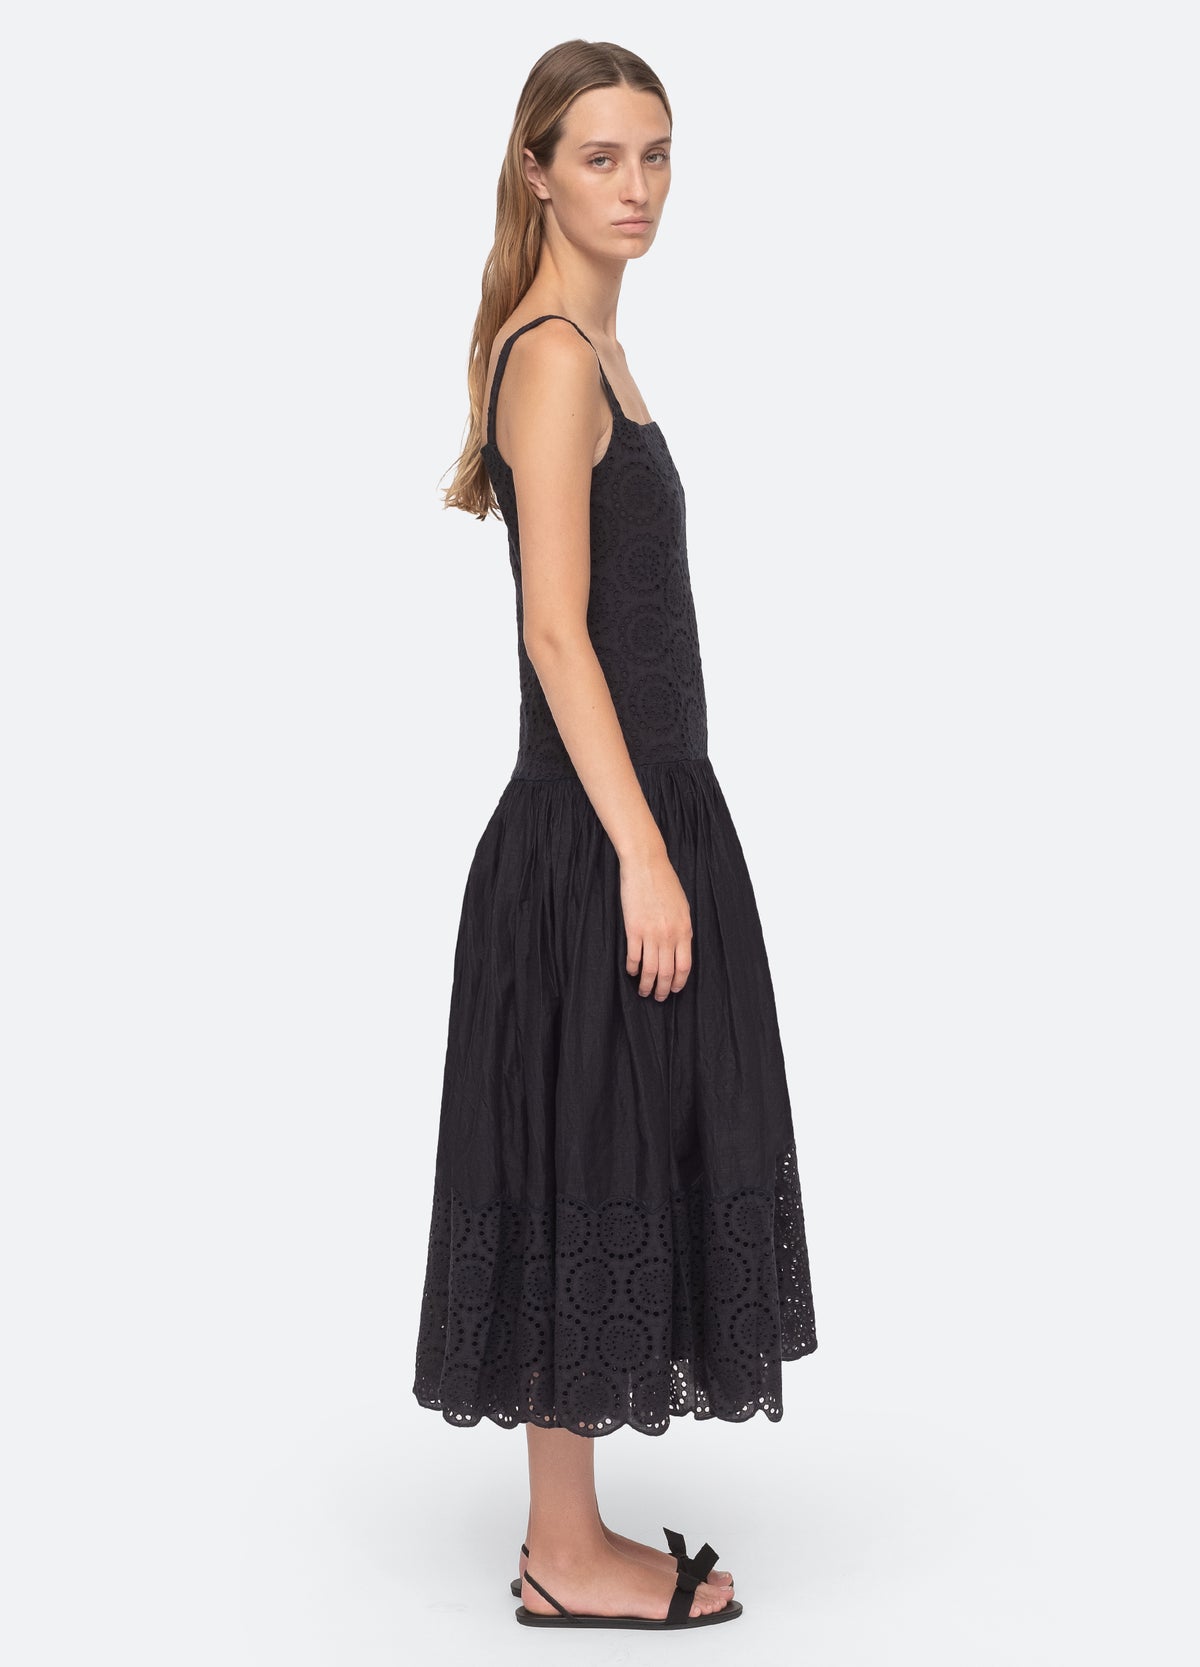 navy-maeve dress-side view - 5